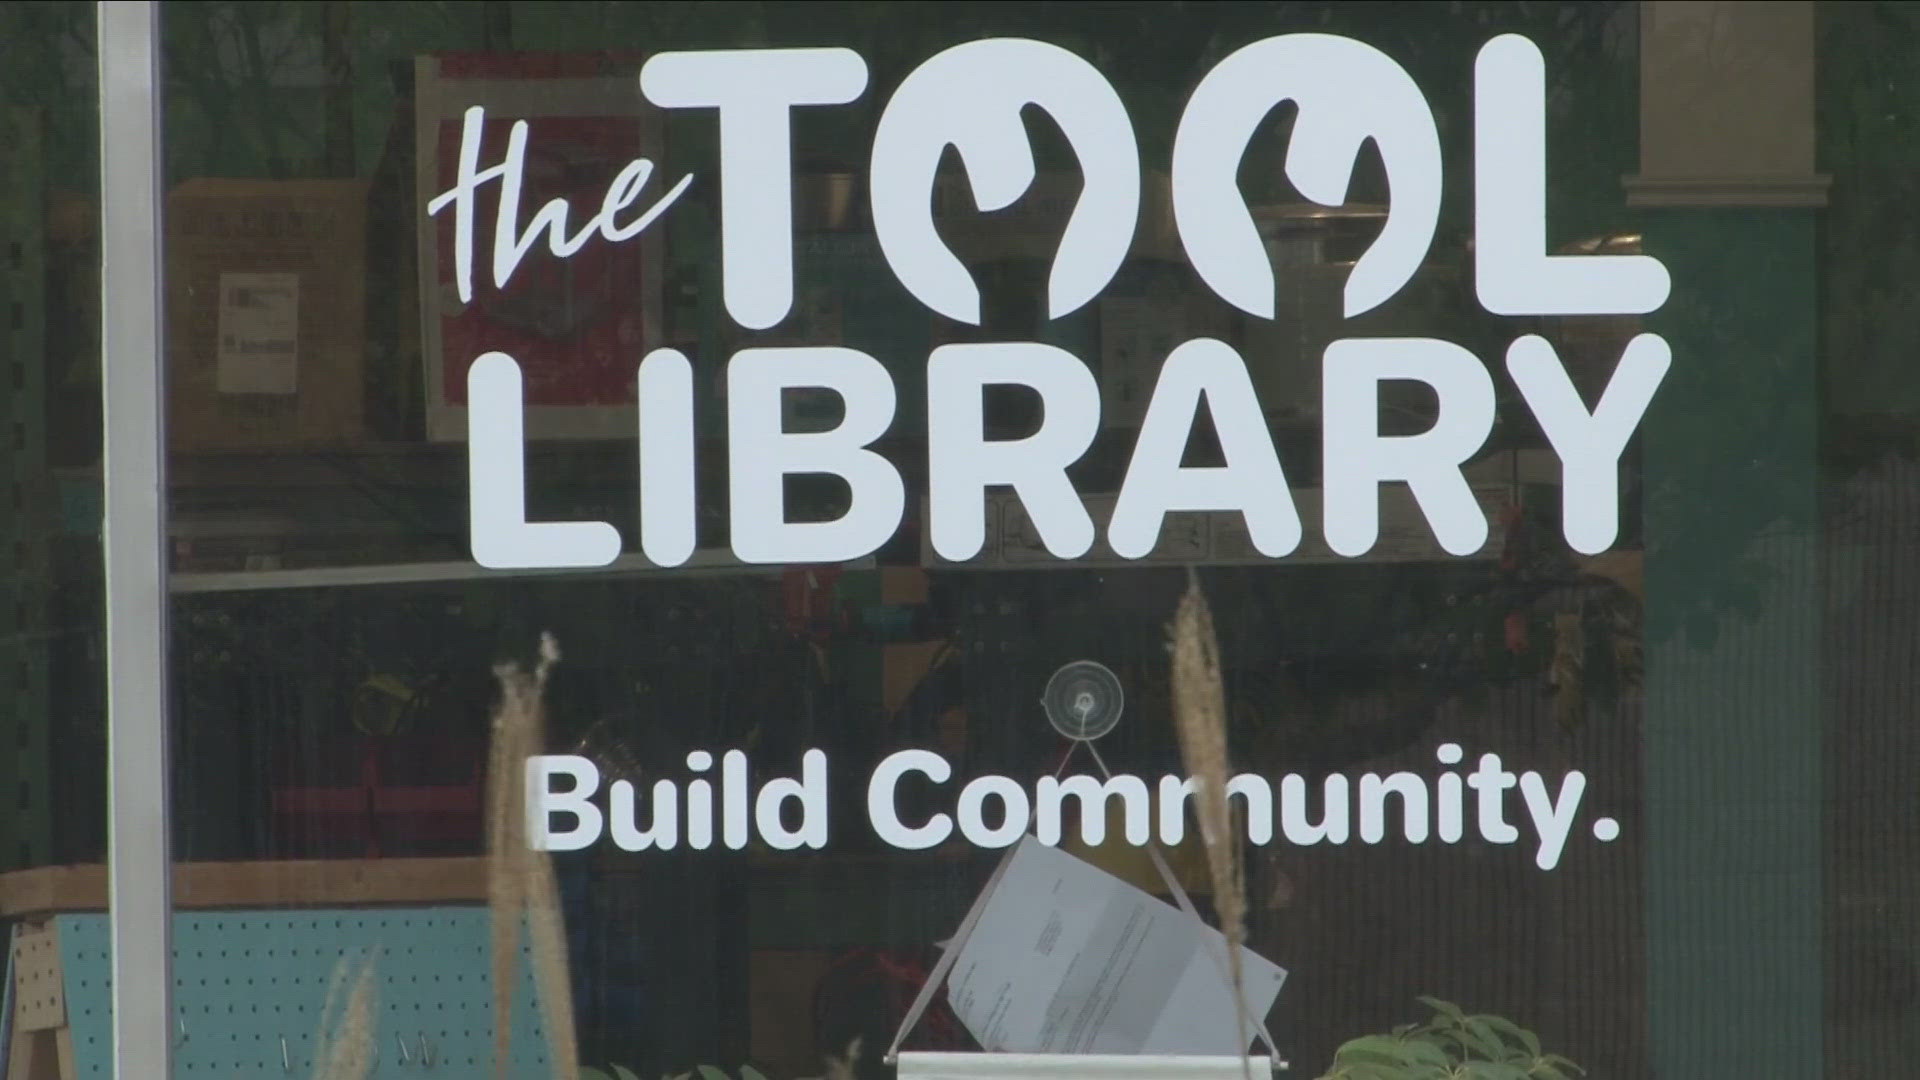 Tool library needs half a million dollars by July